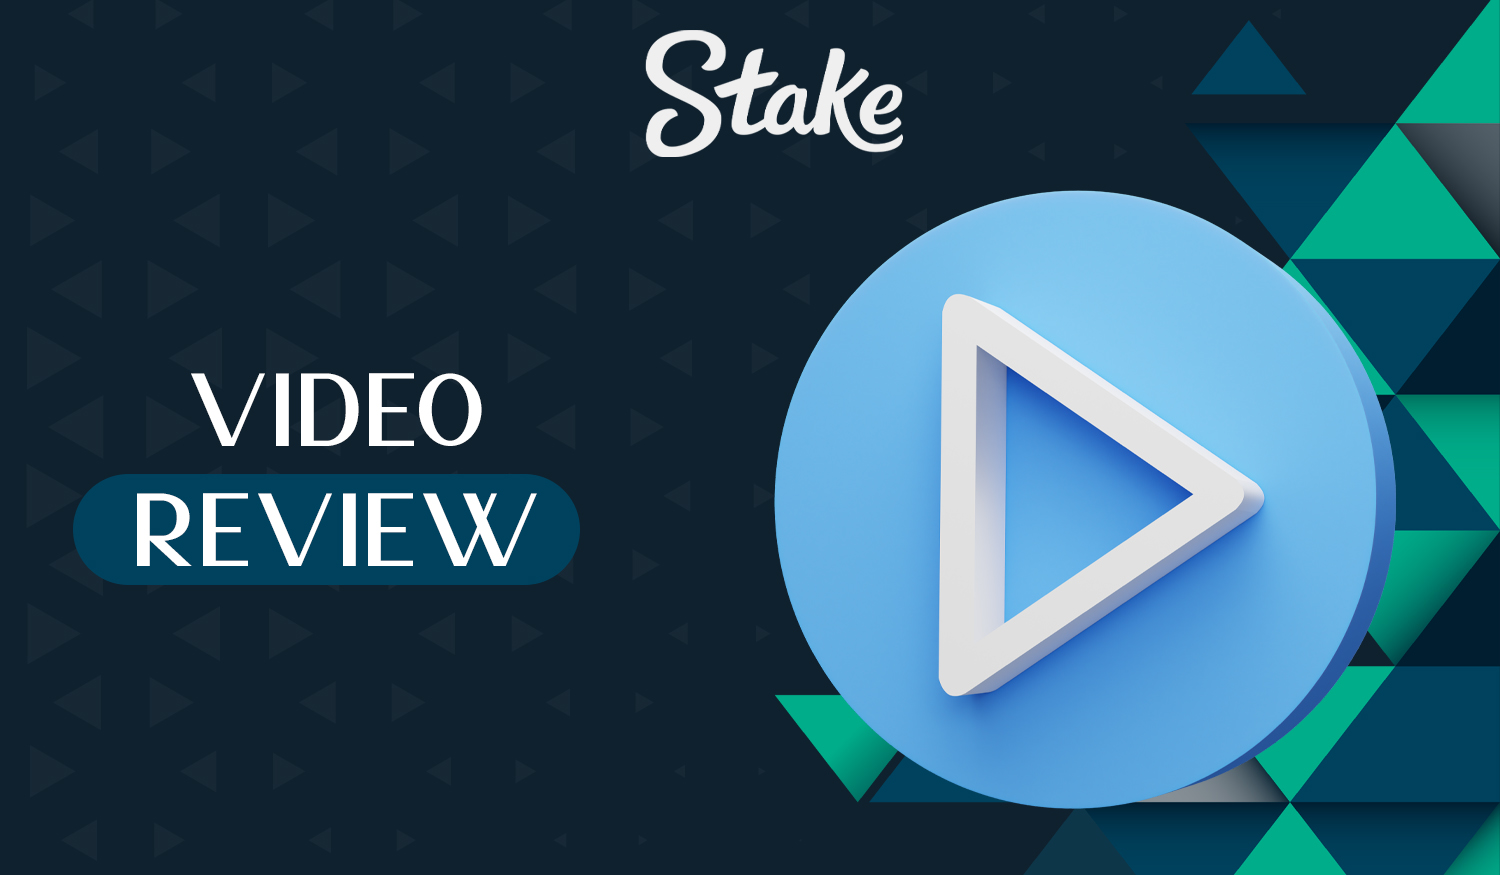 A detailed video overview of the Stake mobile app 